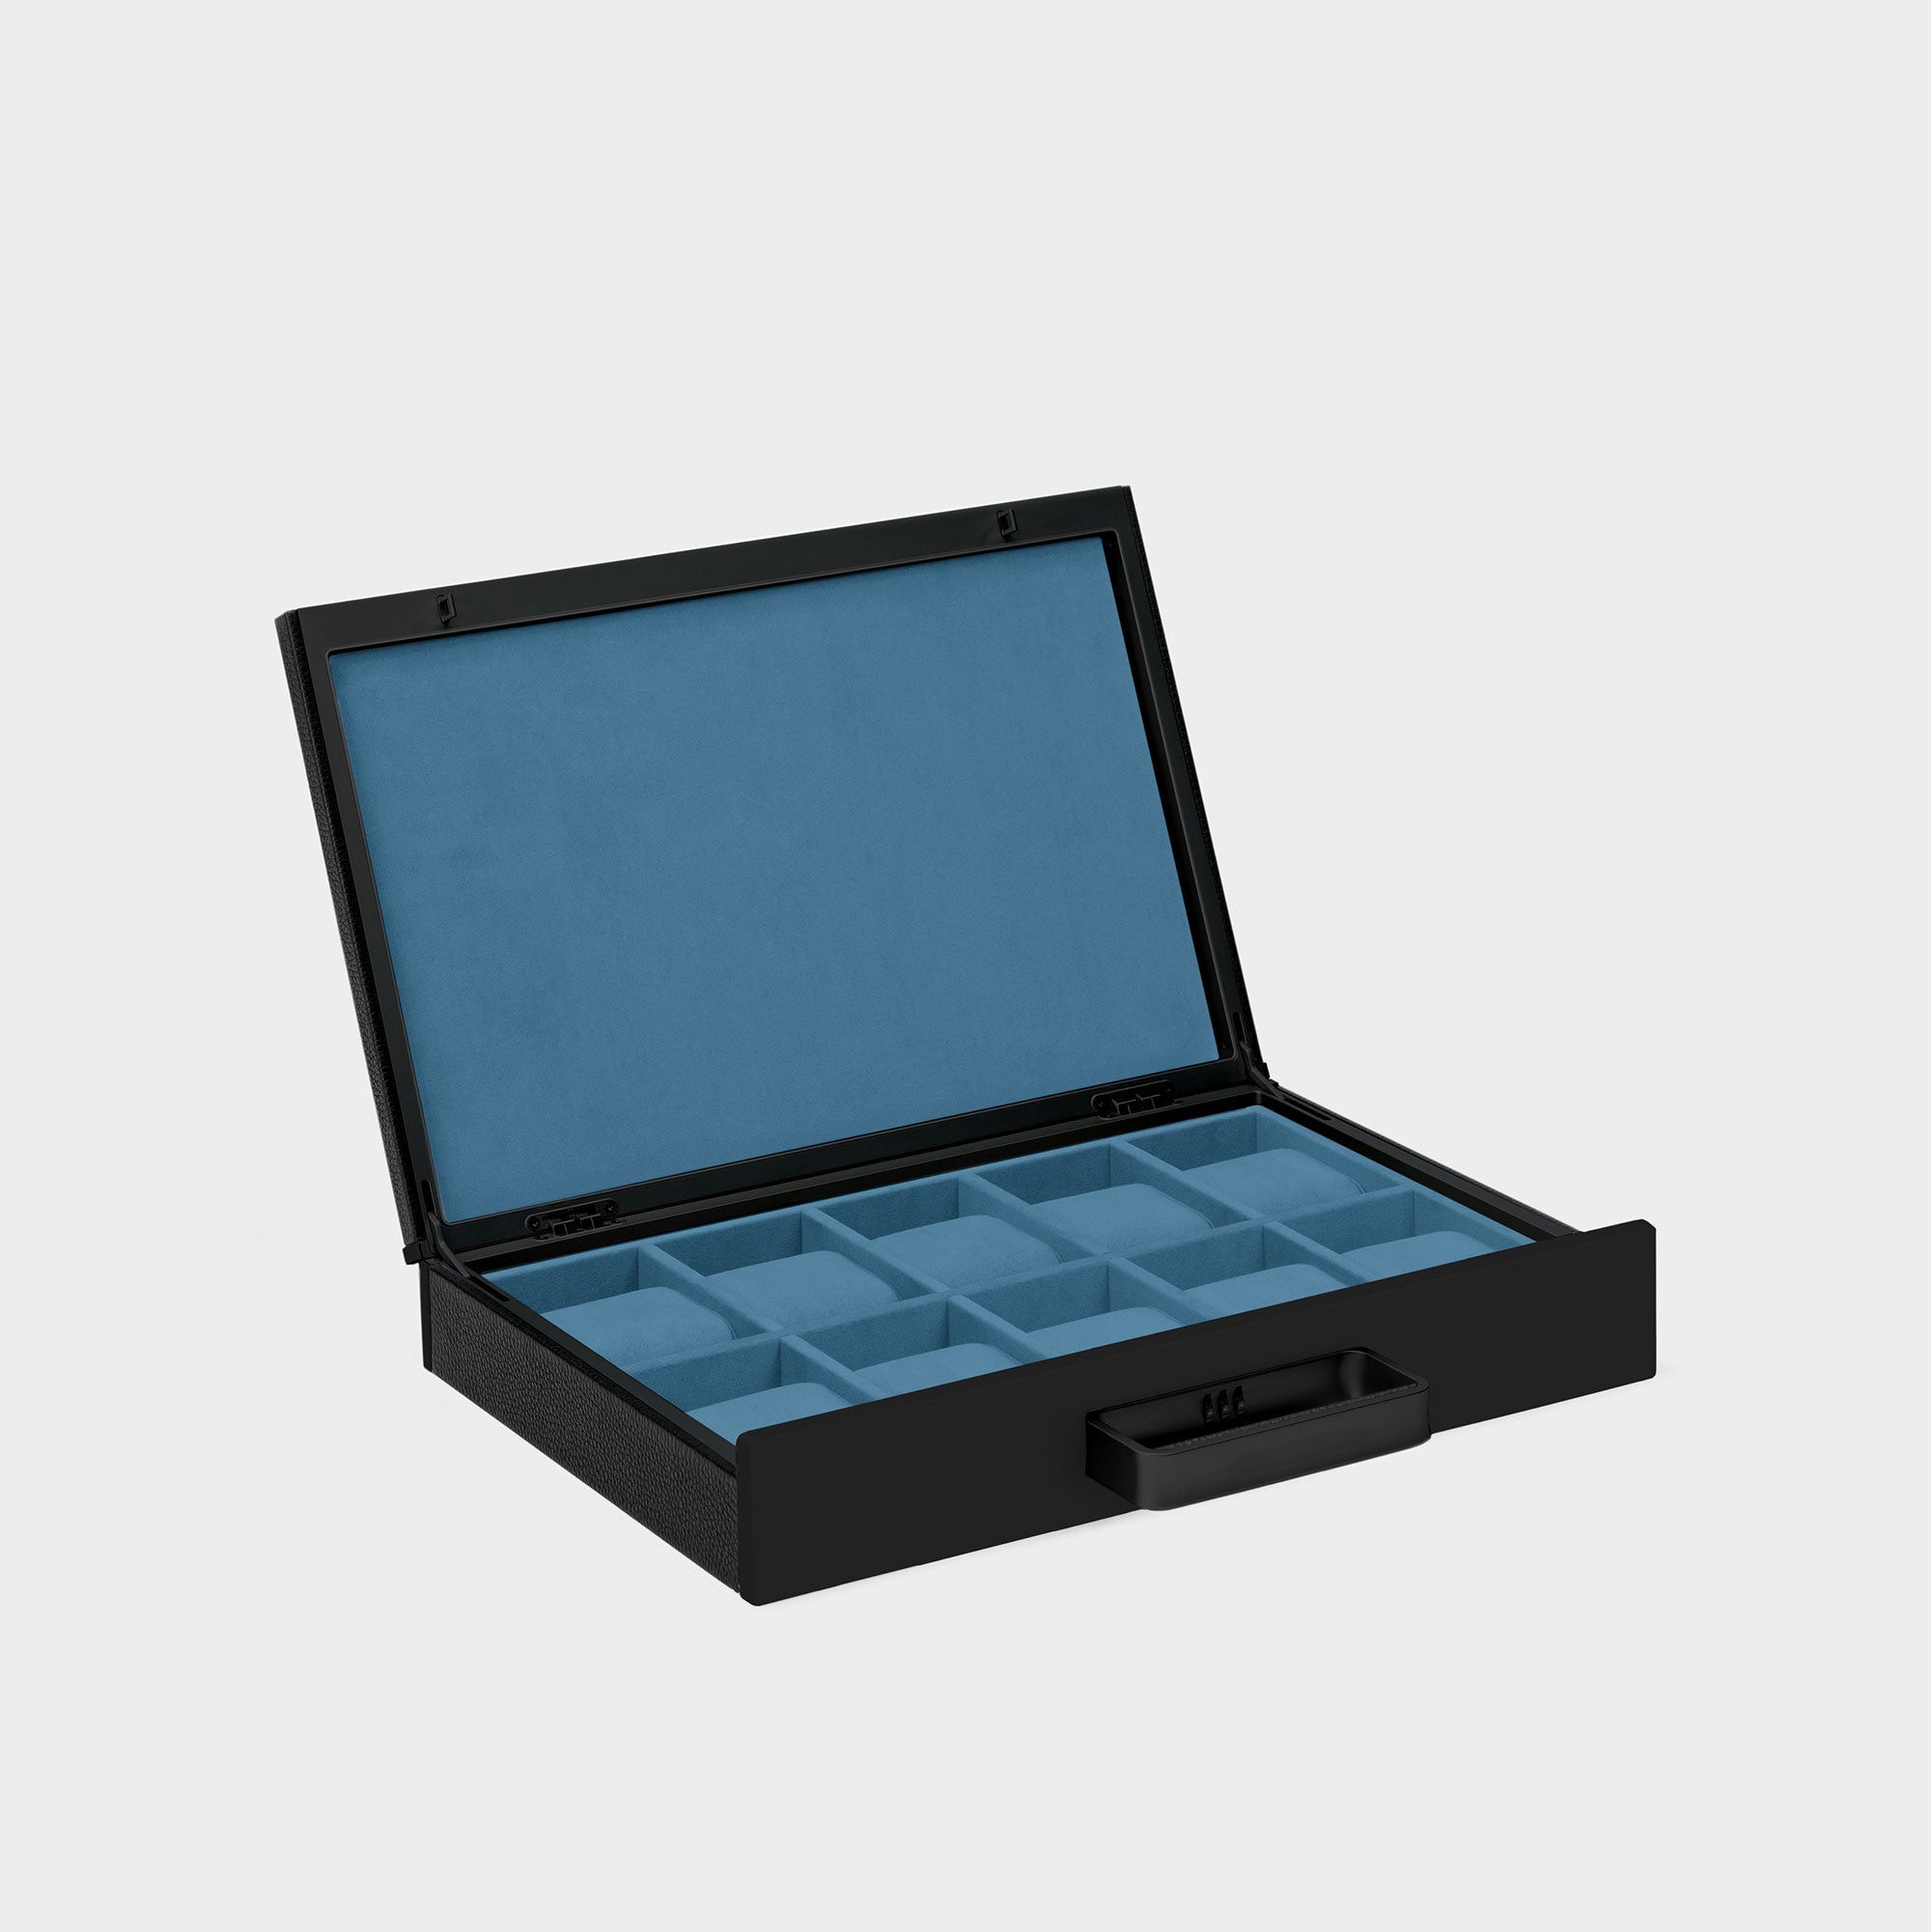 Charles Simon Mackenzie 10 watch briefcase in all black with Cyan blue interior made from fine leather, aluminum and carbon fiber casing and soft Alcantara interior lining